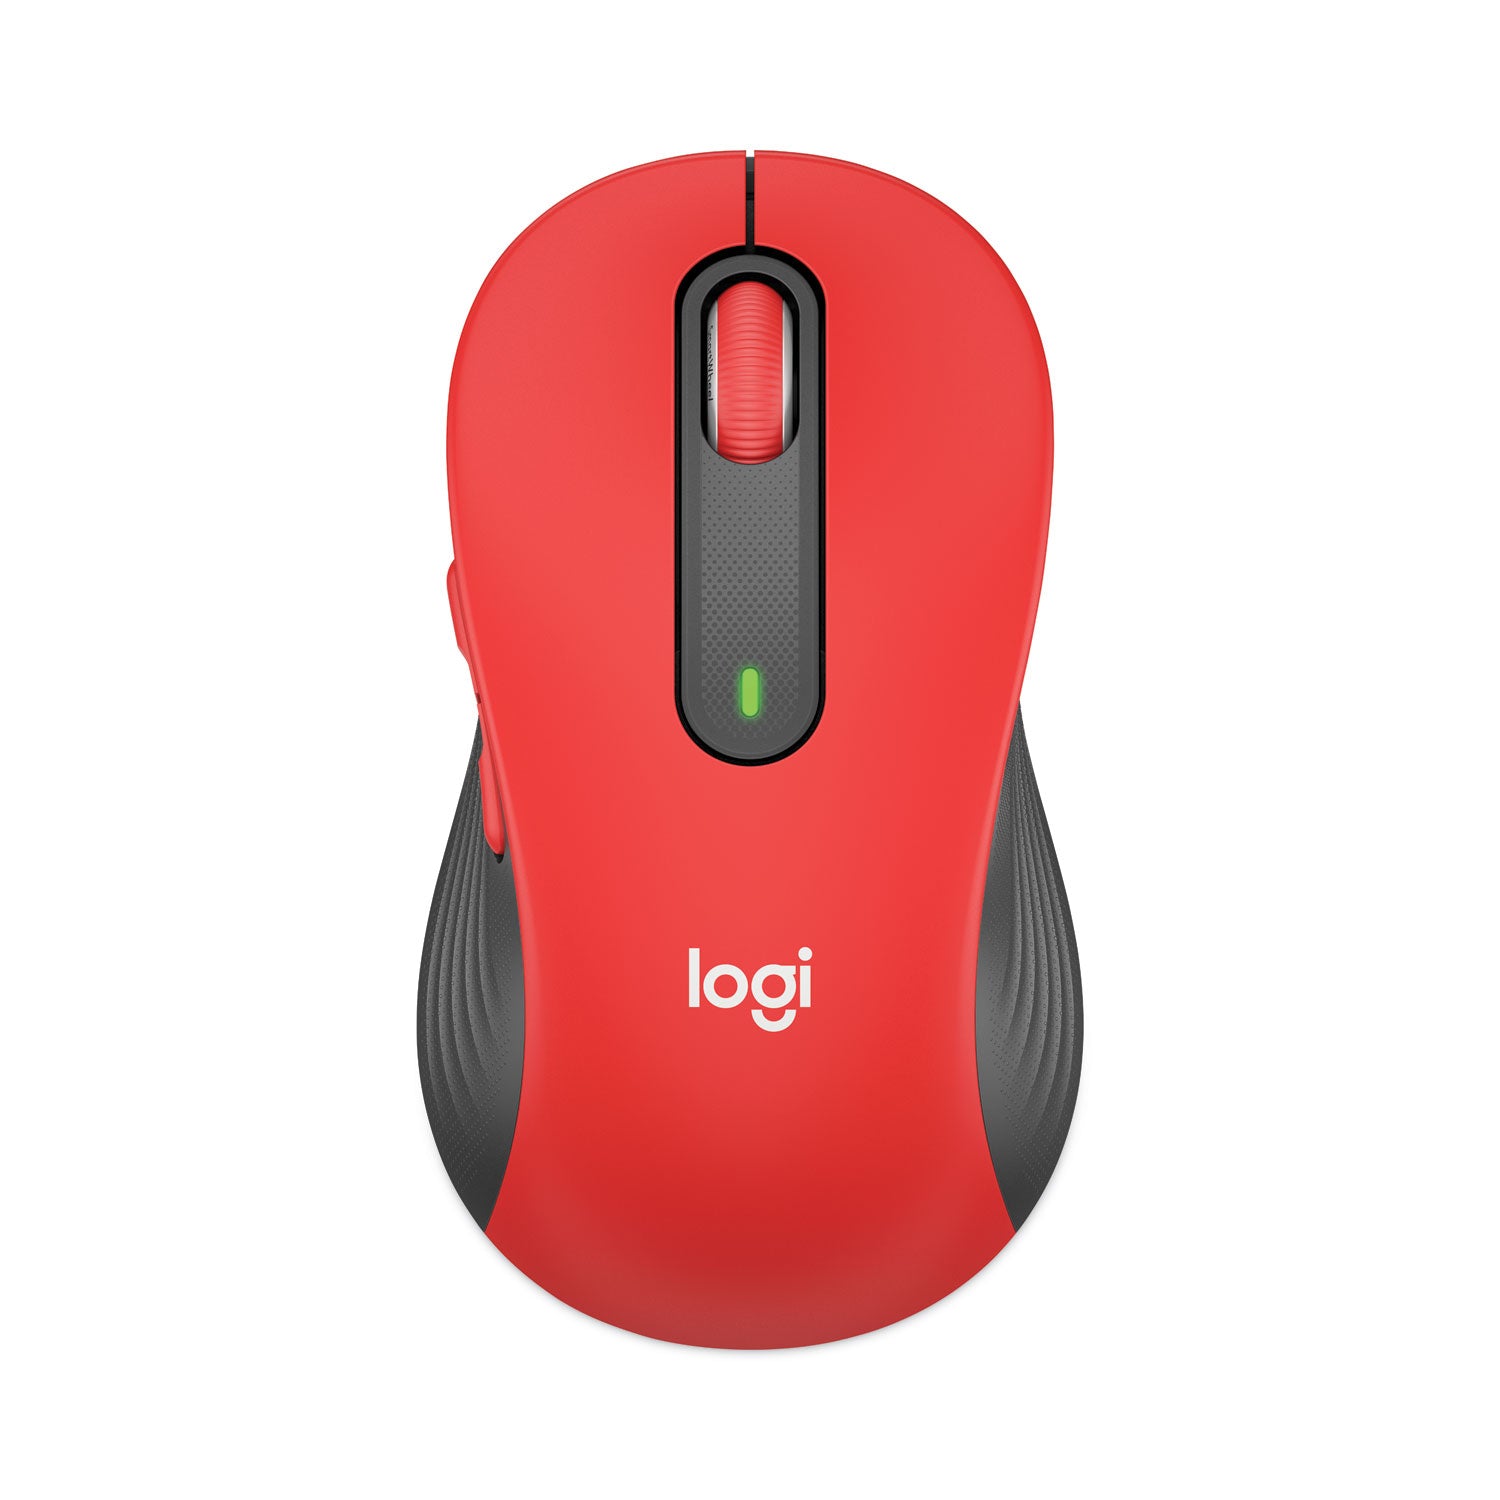 signature-m650-wireless-mouse-large-24-ghz-frequency-33-ft-wireless-range-right-hand-use-red_log910006358 - 1